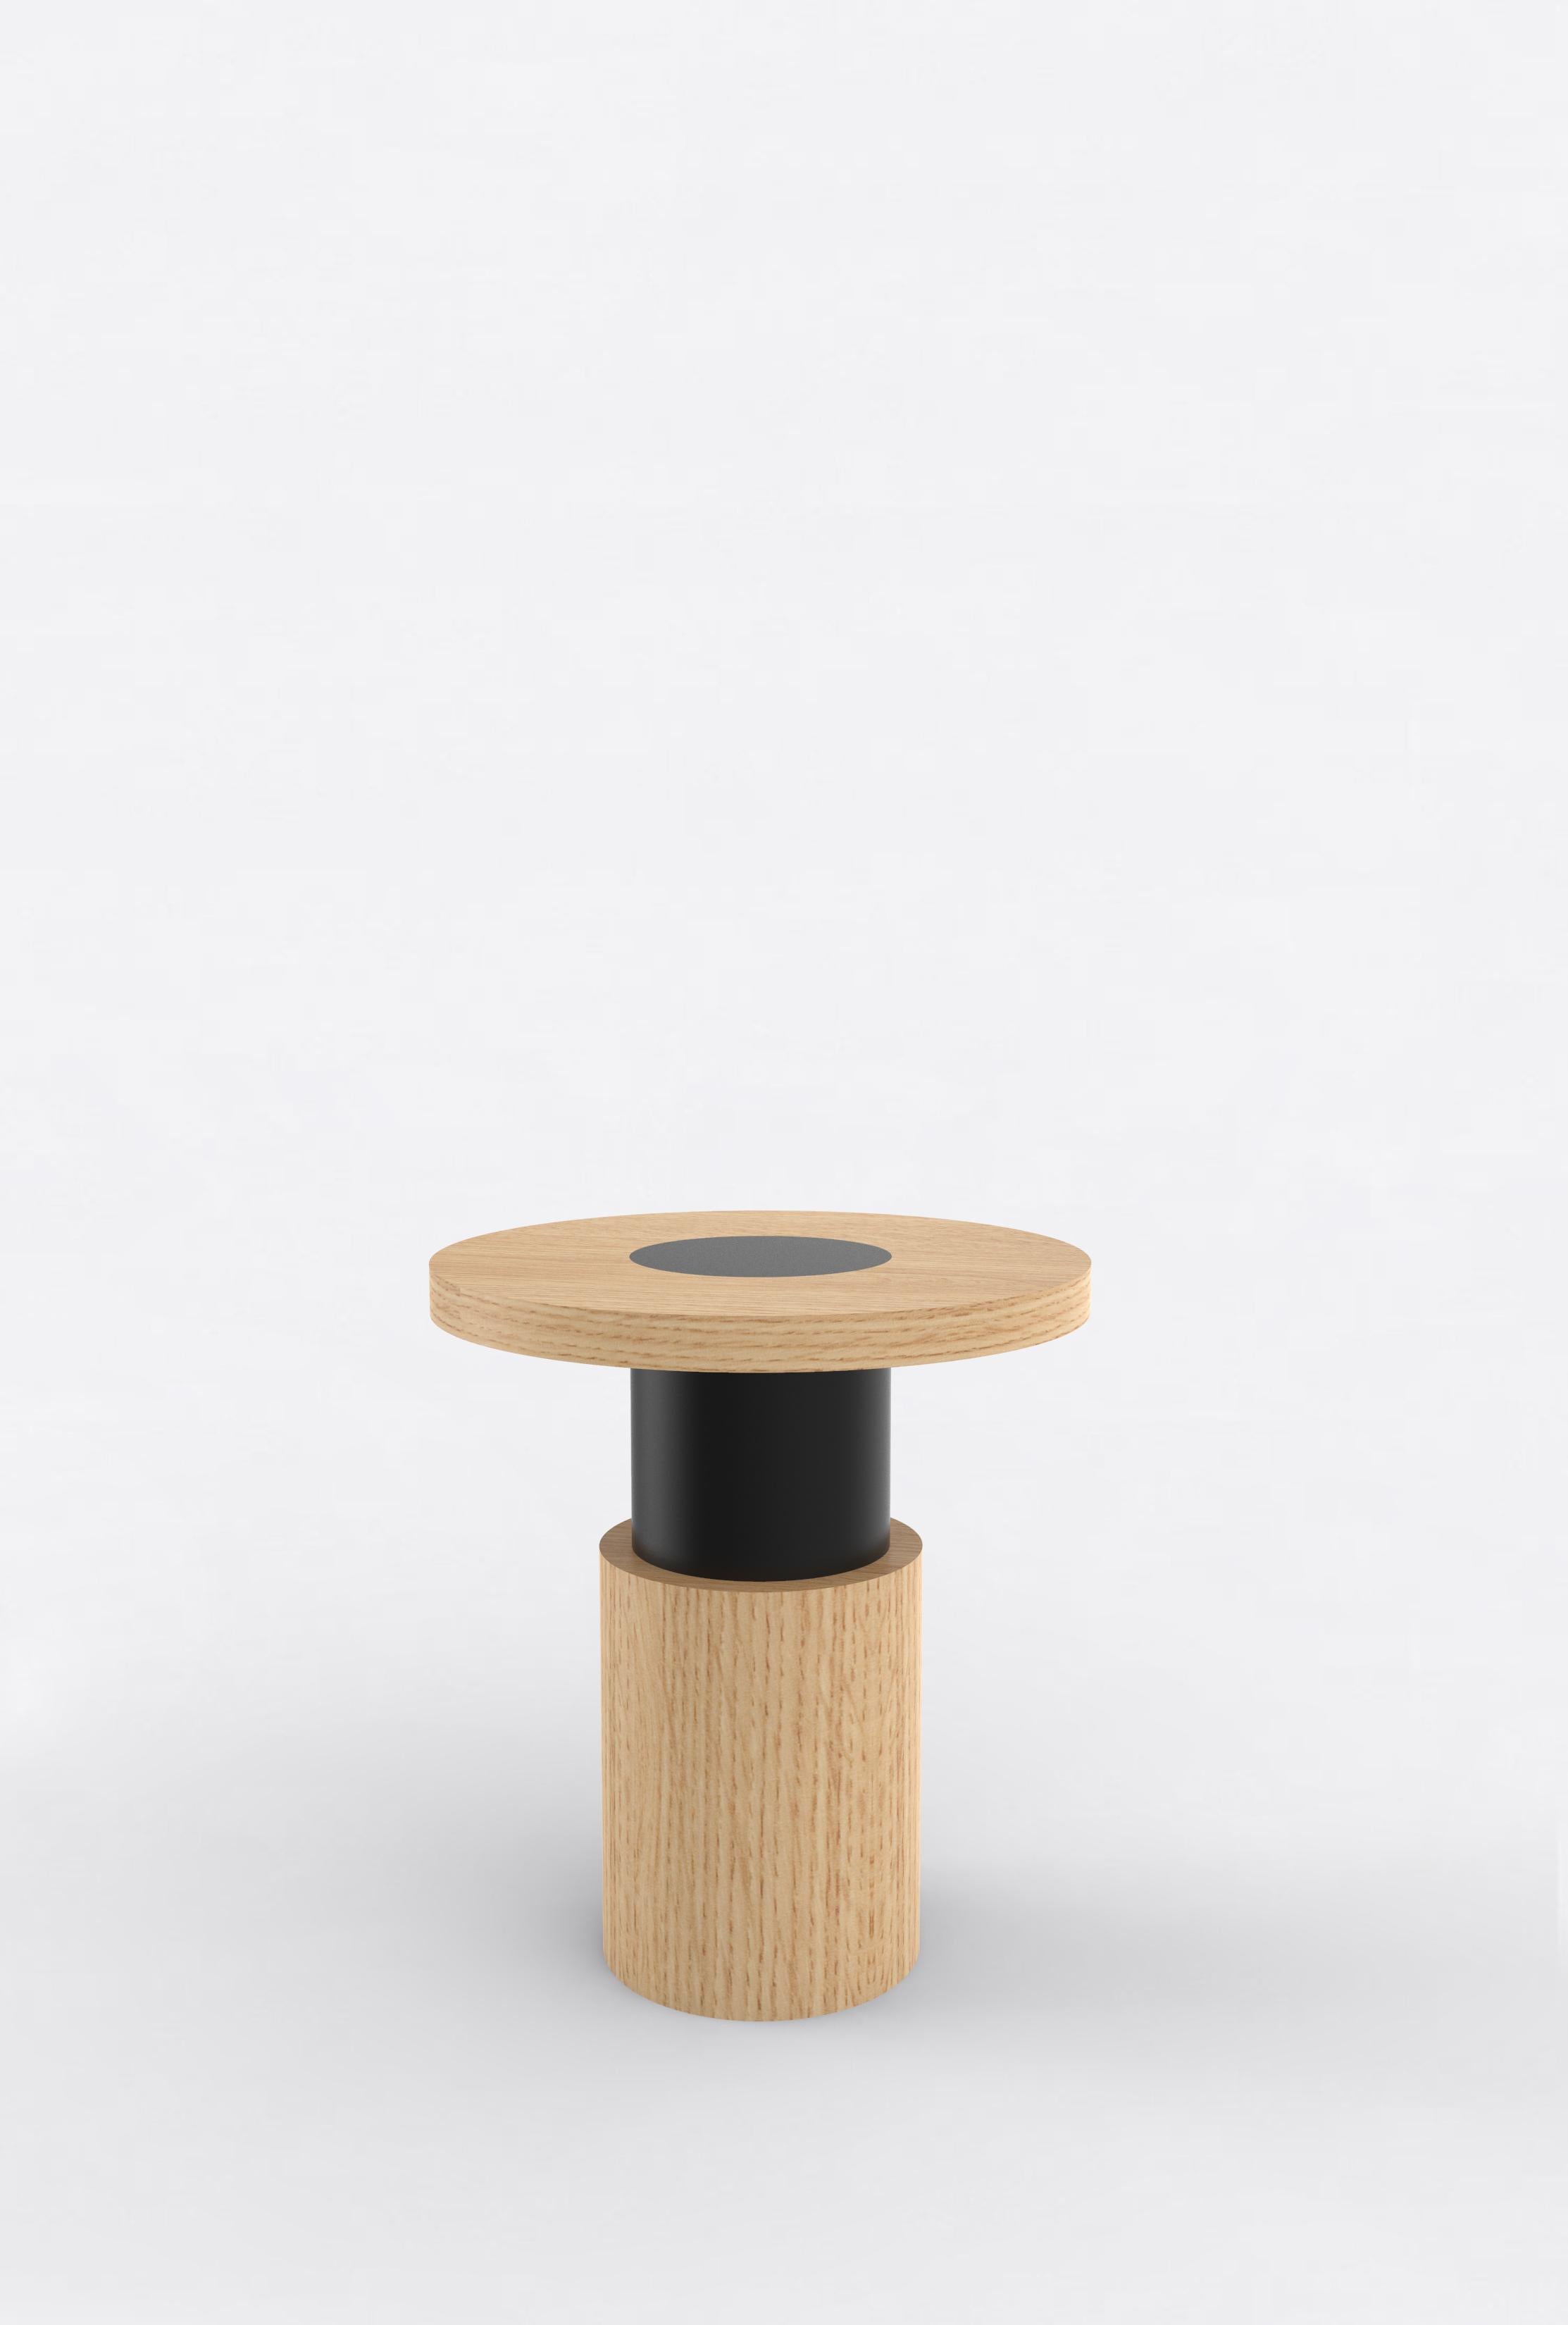 Orphan work 105 End Table, 2020
Shown in oak and black
Available in natural oak with painted base
Measures: 20” diameter x 22” height

Orphan work is designed to complement in the heart of Soho, New York City. Each piece is handmade in New York and